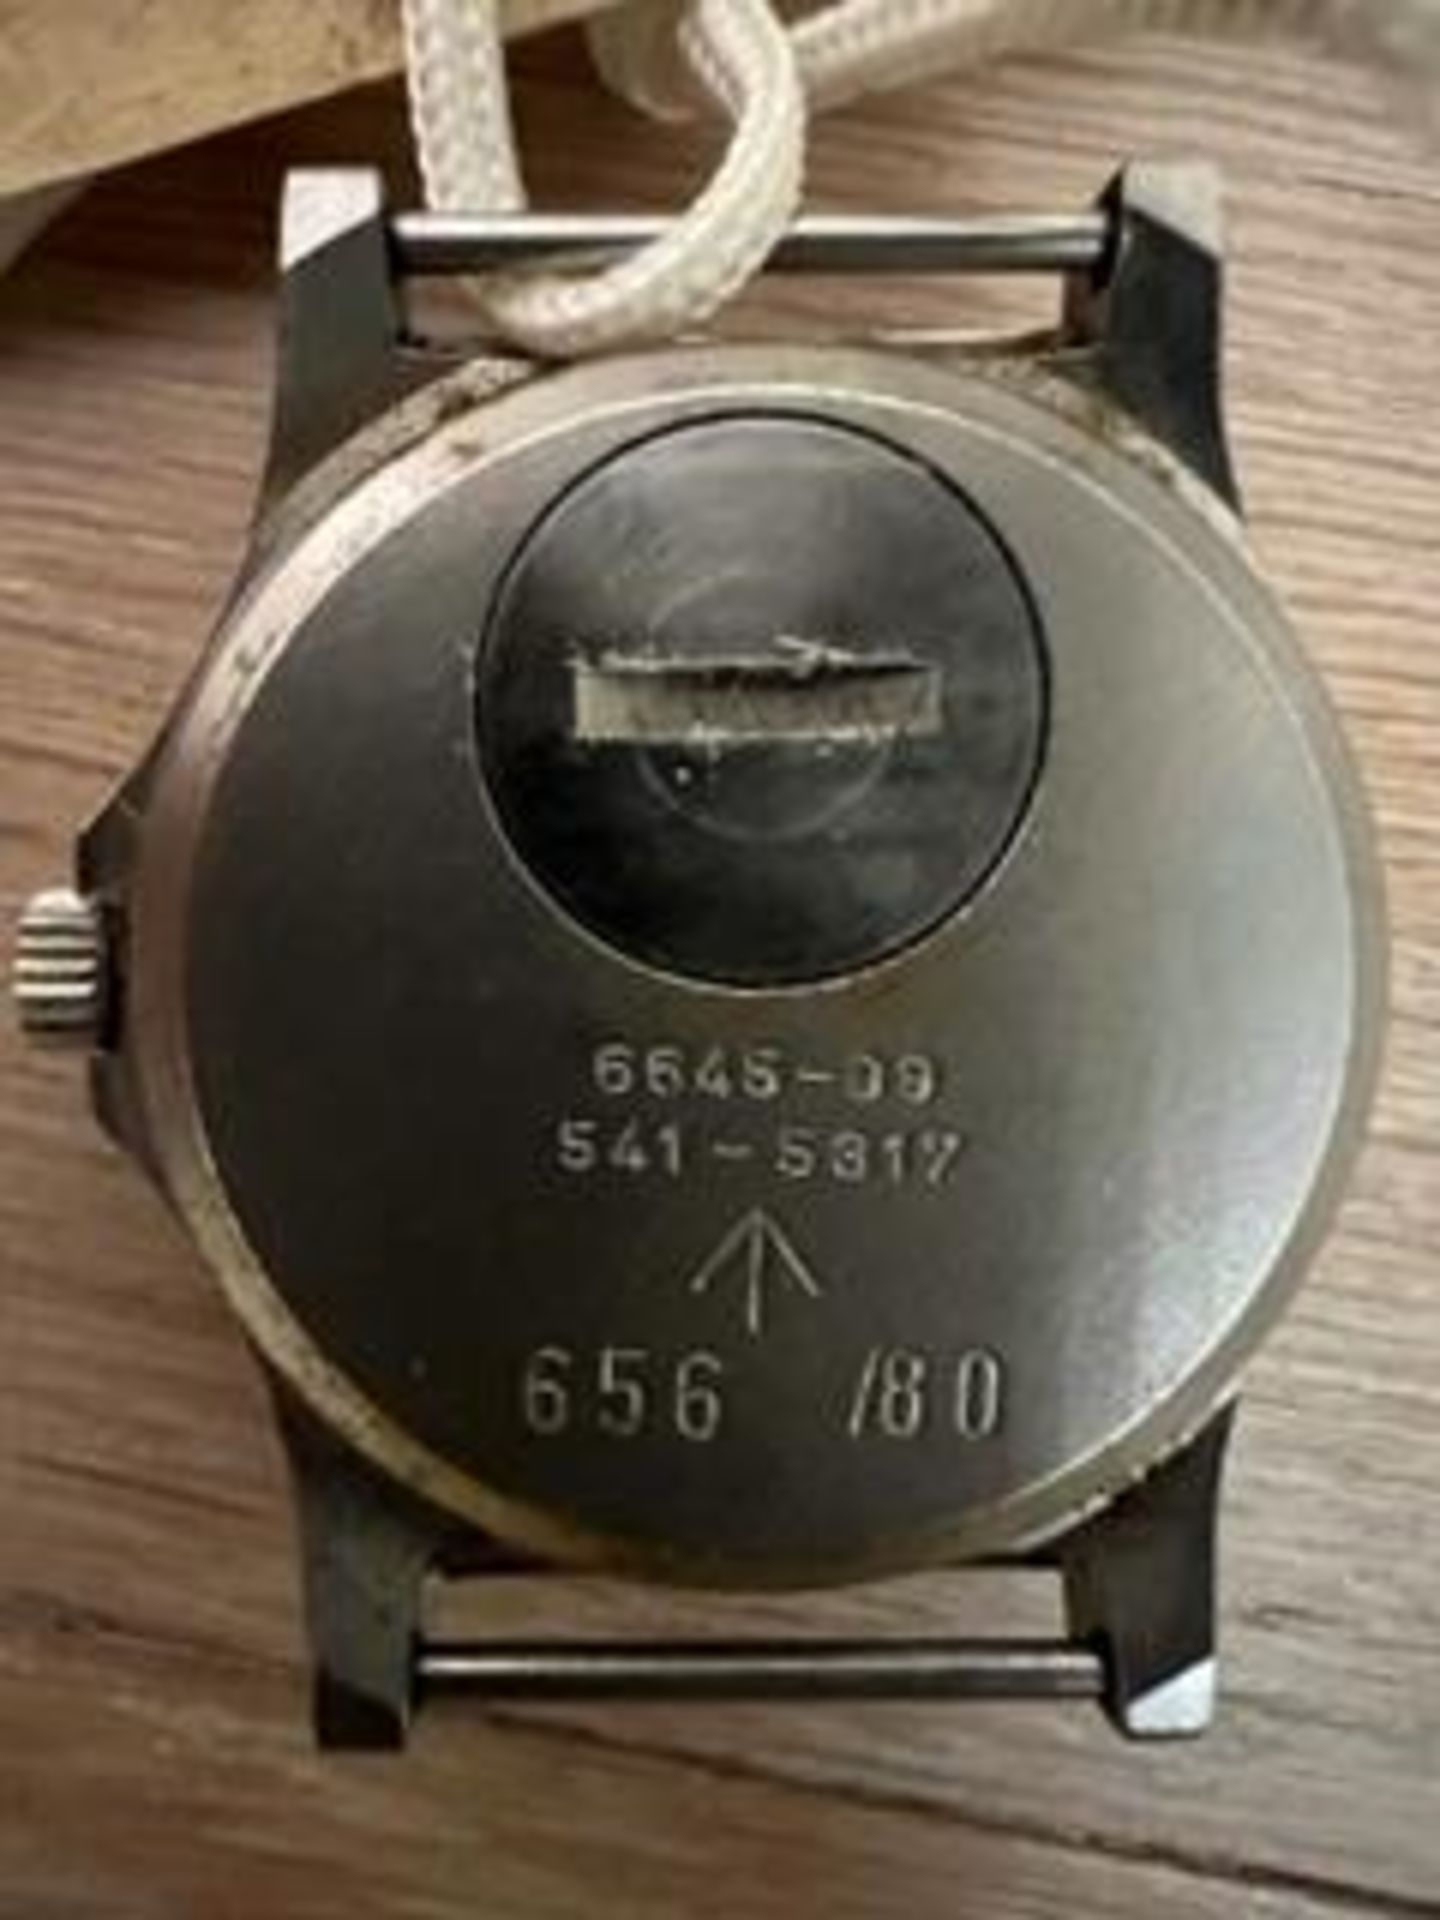 V. RARE CWC FAT BOY W10 BRITISH ARMY SERVICE WATCH NATO MARKS DATE 1980 SN.656 - Image 4 of 5